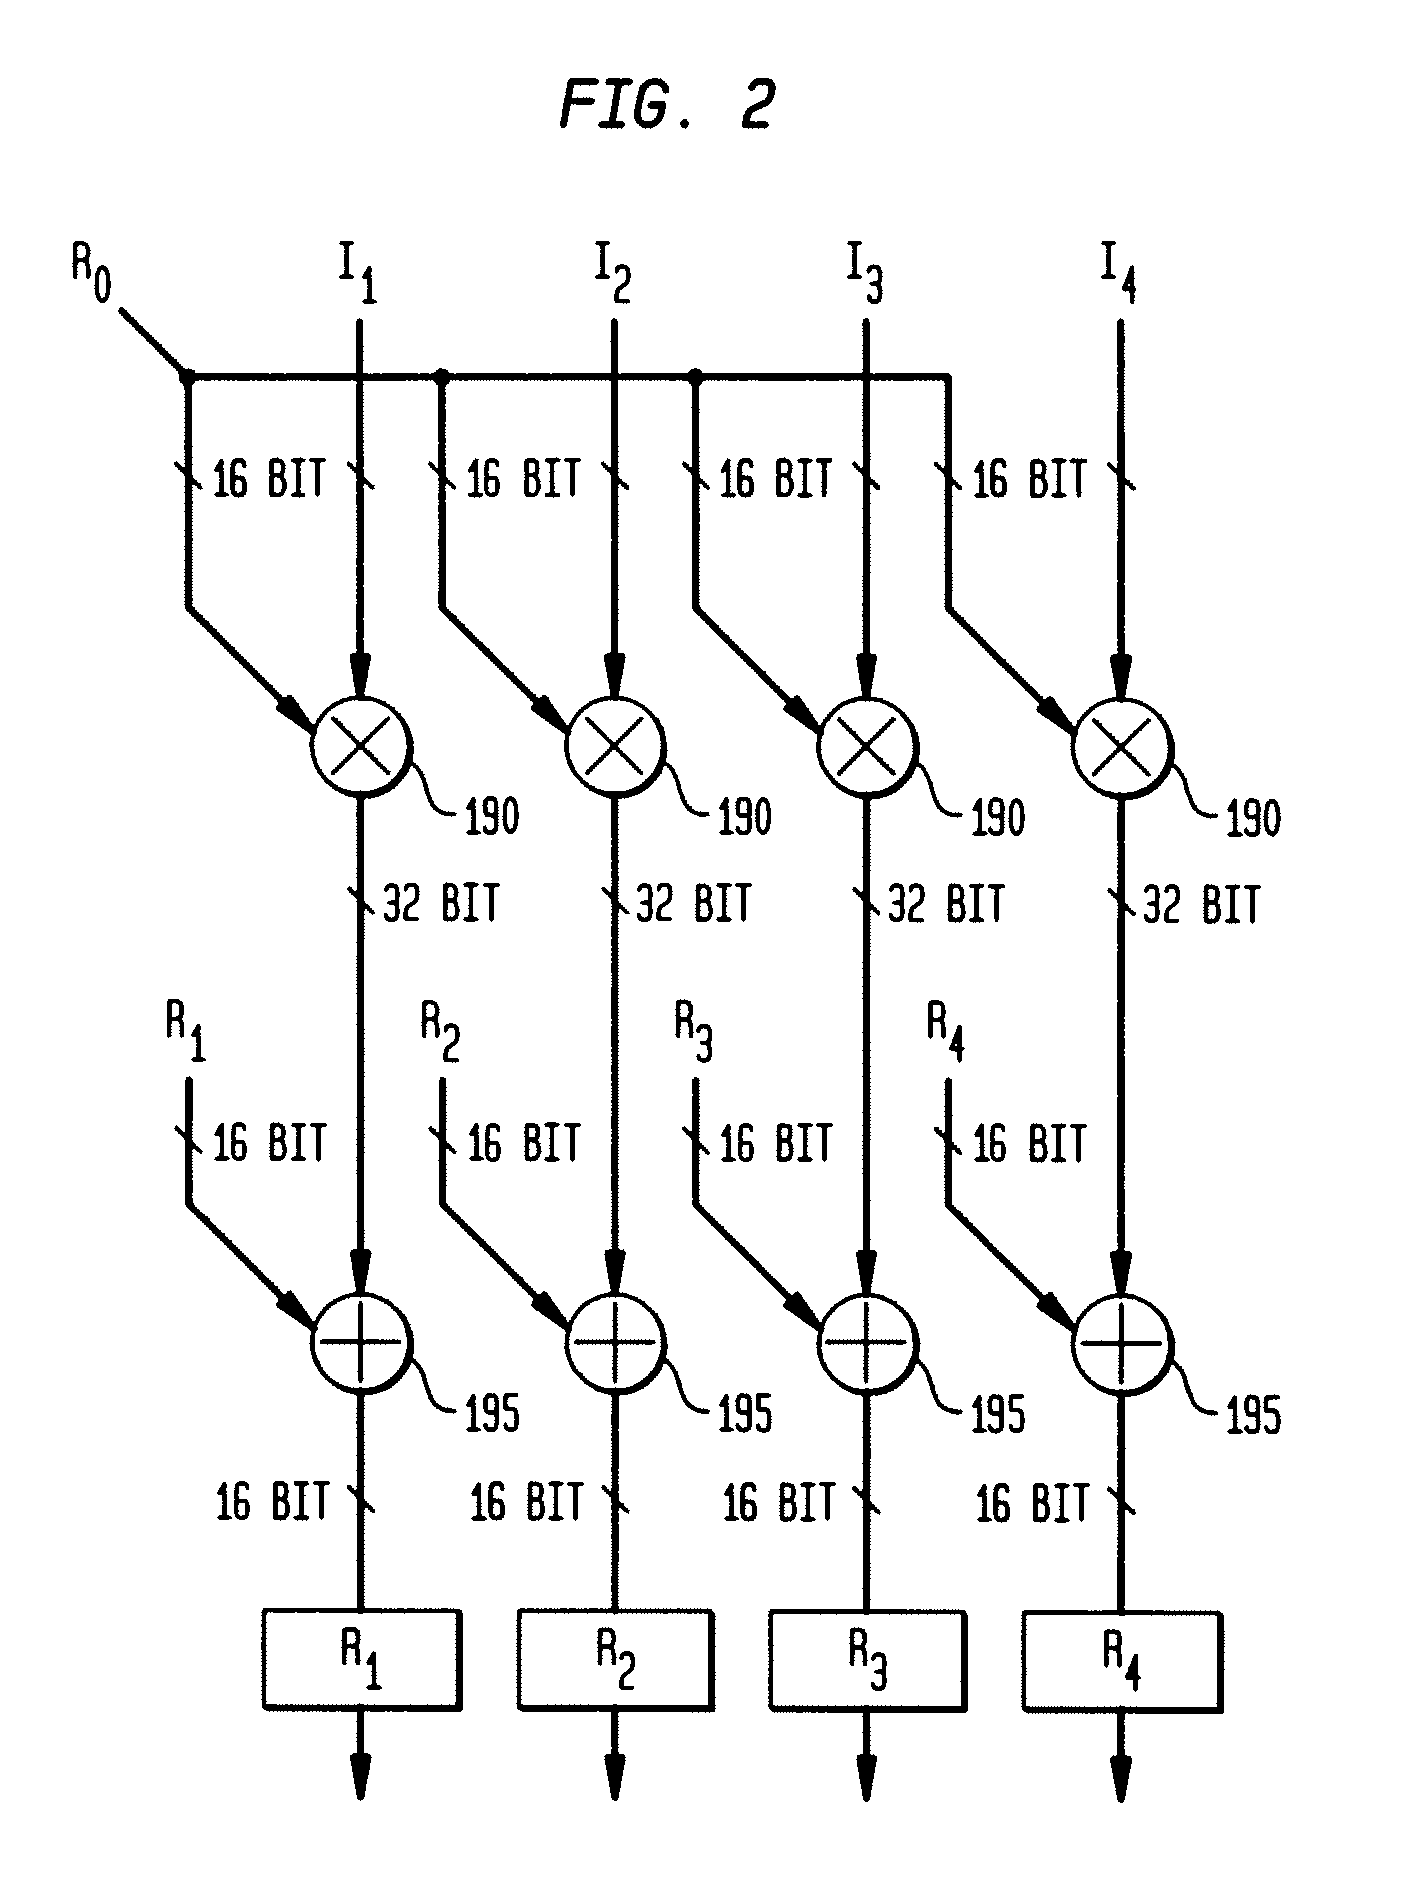 Method and system for managing hardware resources to implement system functions using an adaptive computing architecture